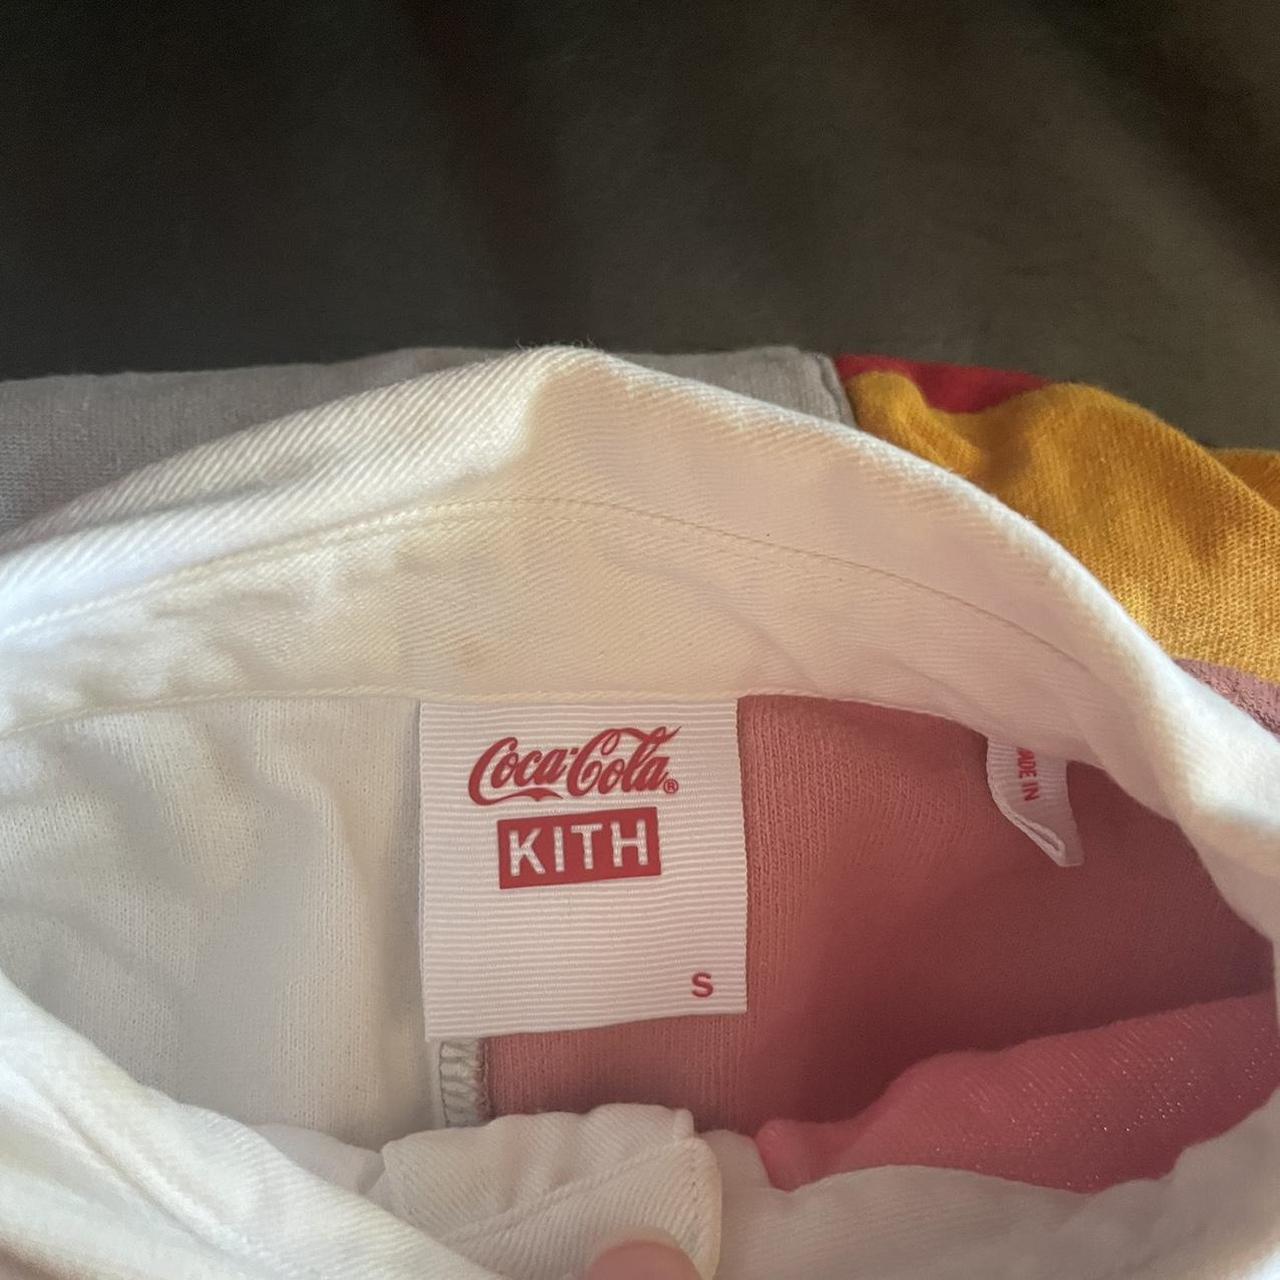 kith x Coca Cola colorblock rugby multi patch shirt.... - Depop